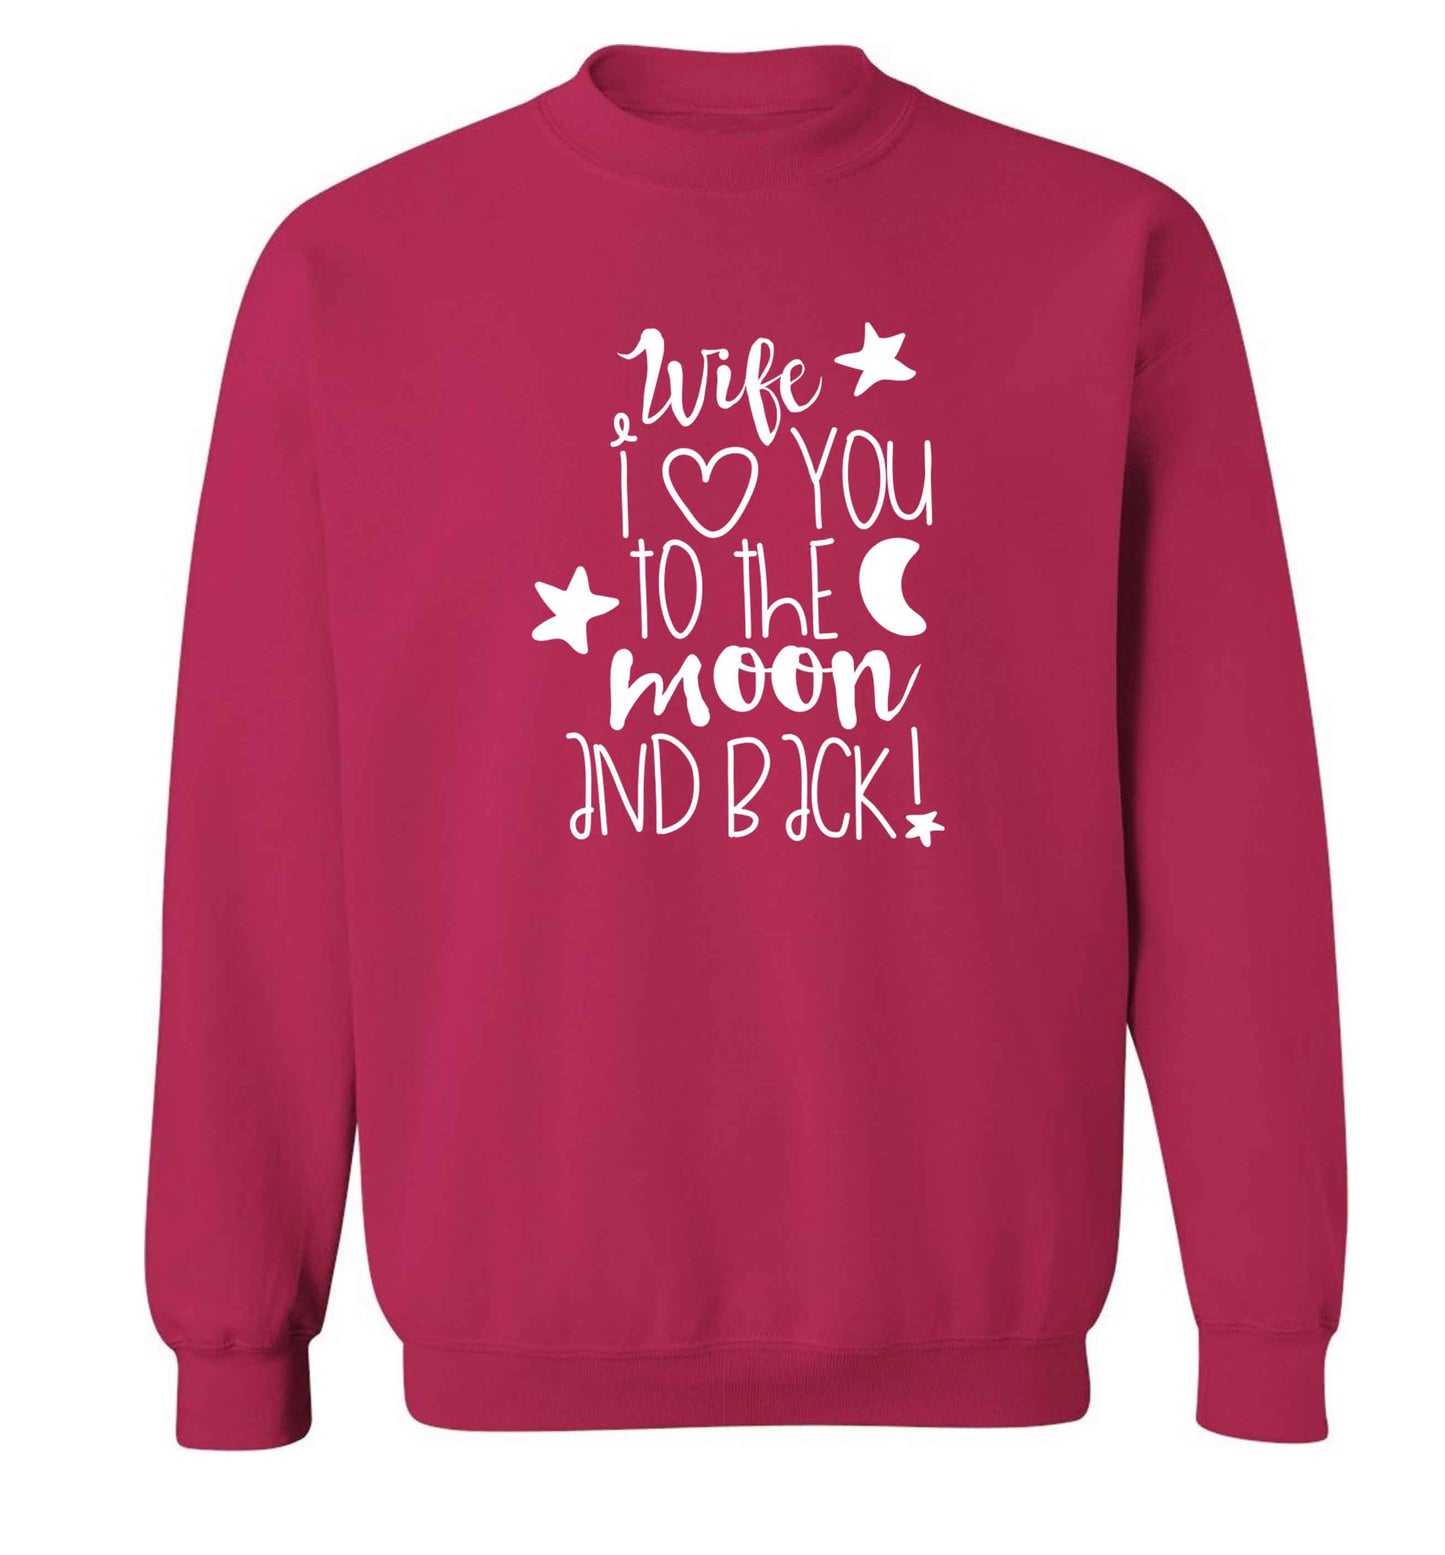 Wife I love you to the moon and back adult's unisex pink sweater 2XL